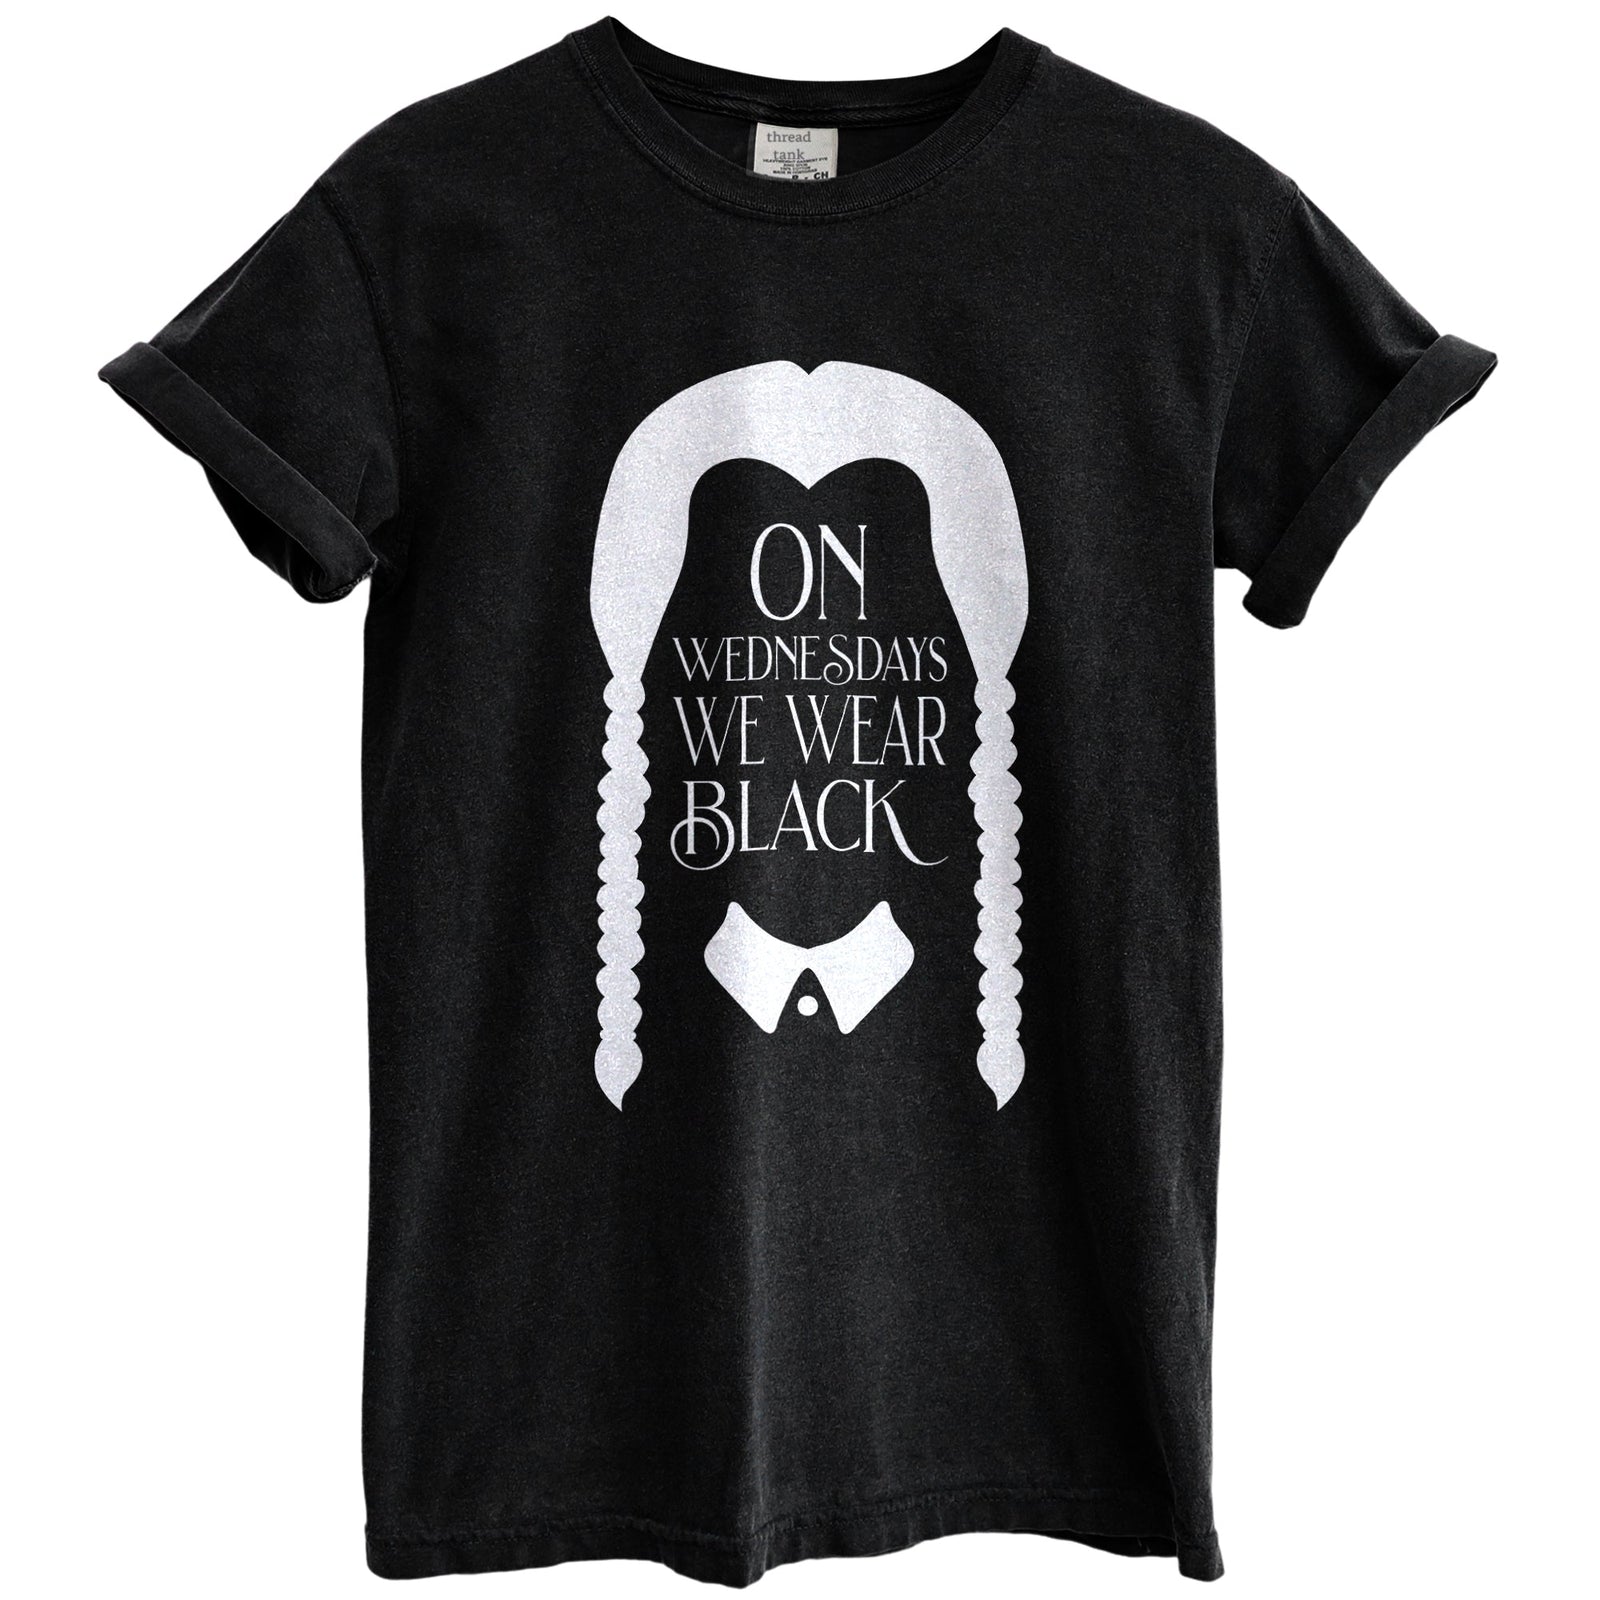 We Wear Black Garment-Dyed Tee - Stories You Can Wear